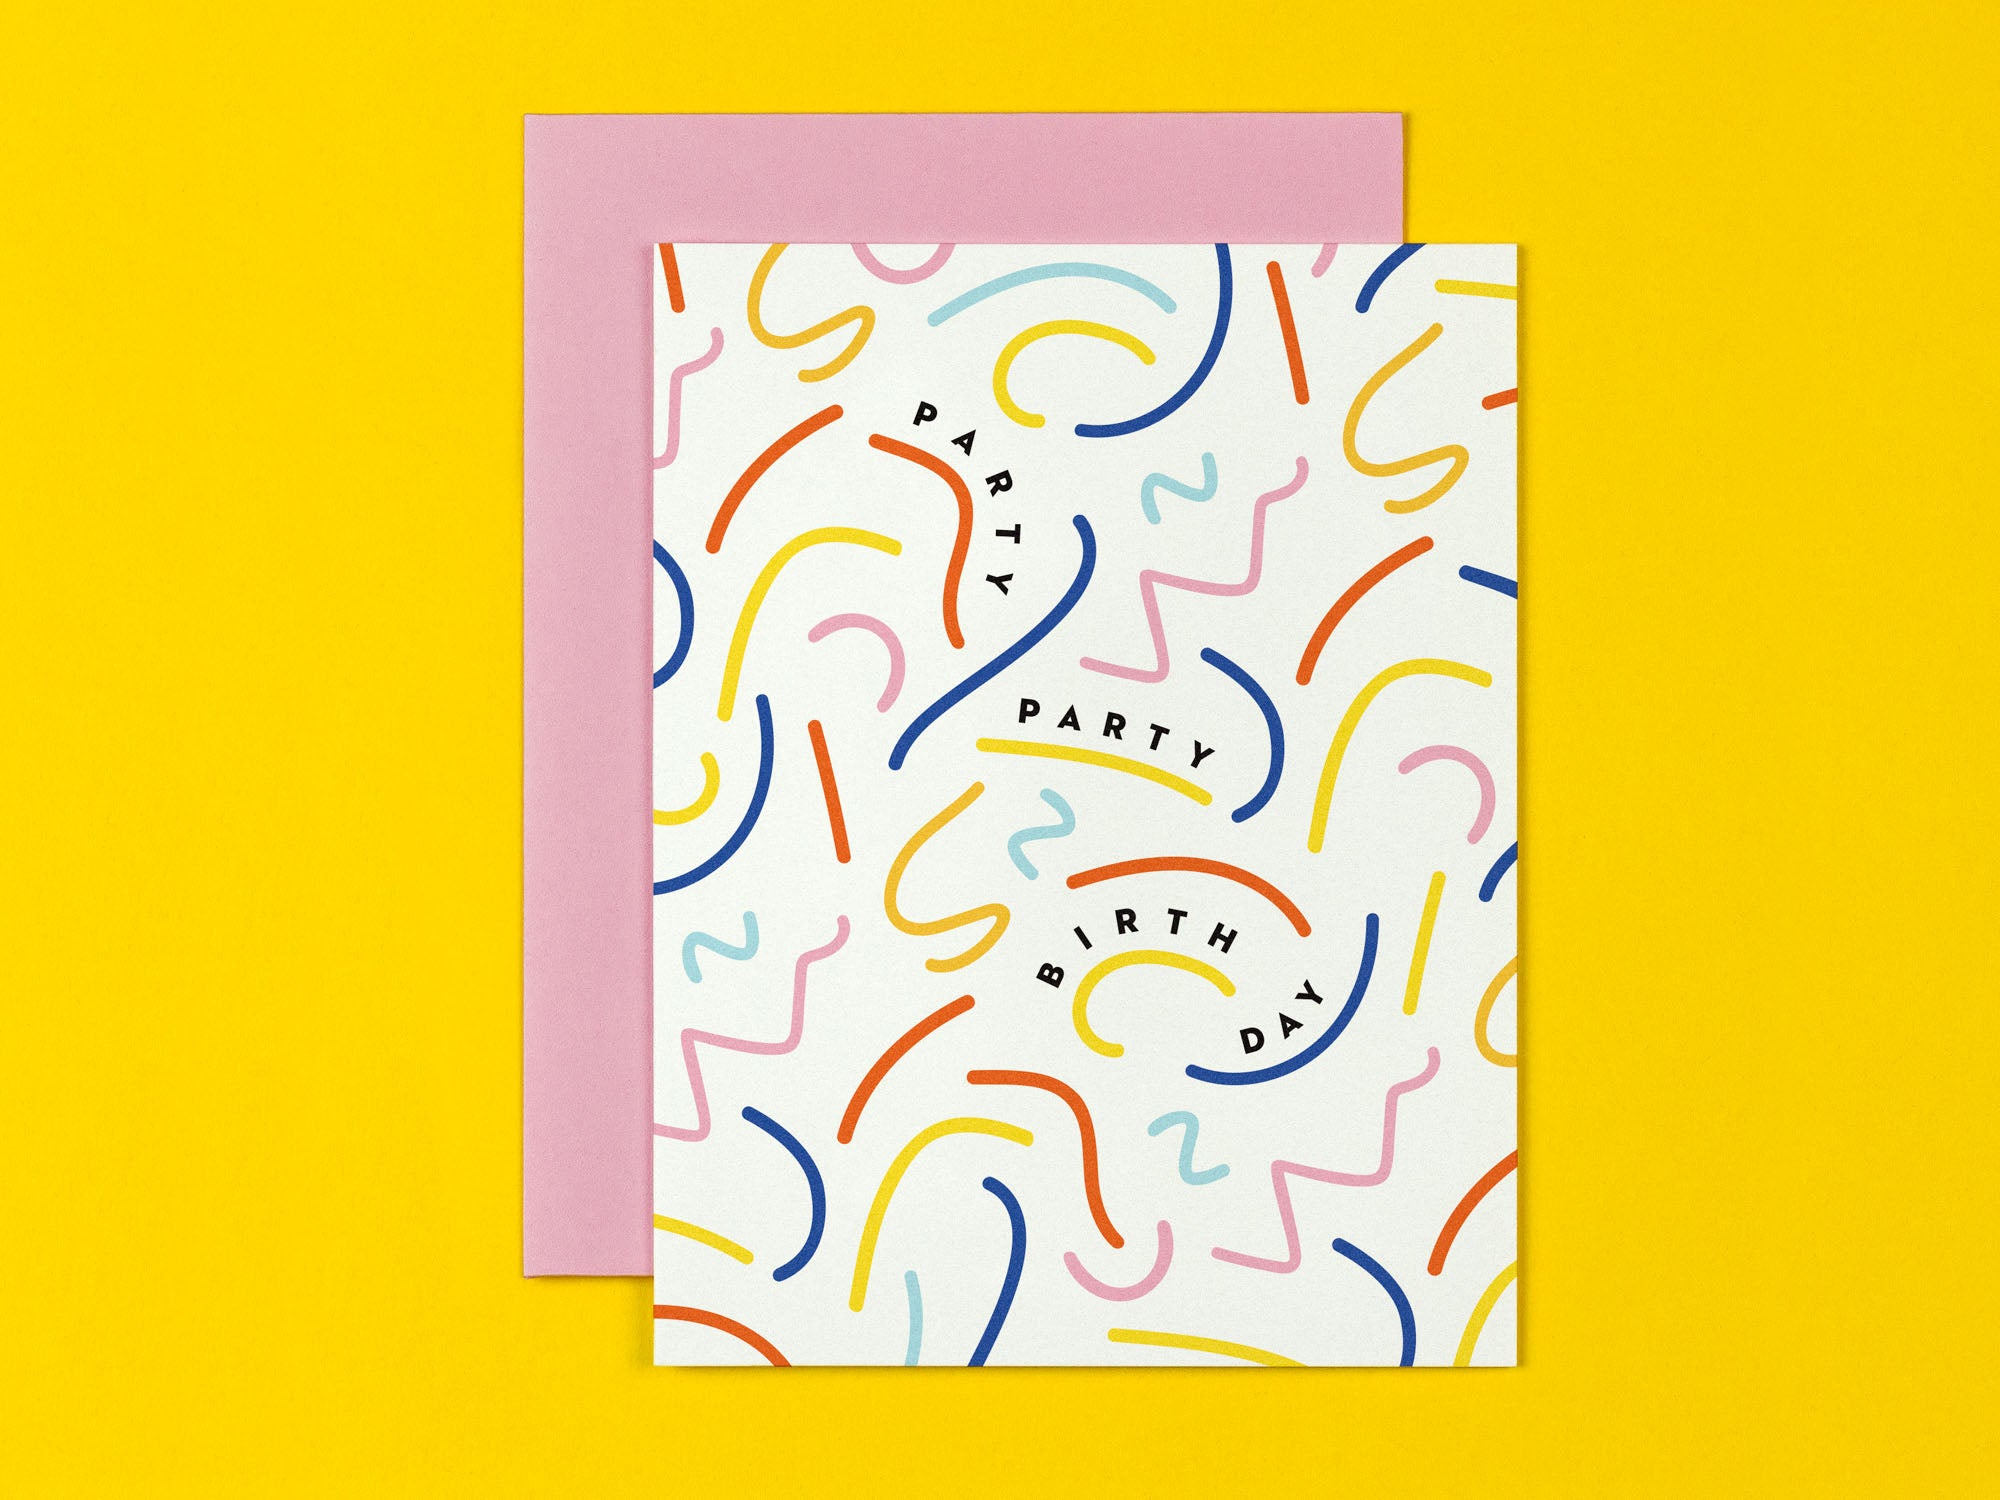 Squiggle Party Birthday Card by My Darlin' that reads Party Party Birth Day • @mydarlin_bk